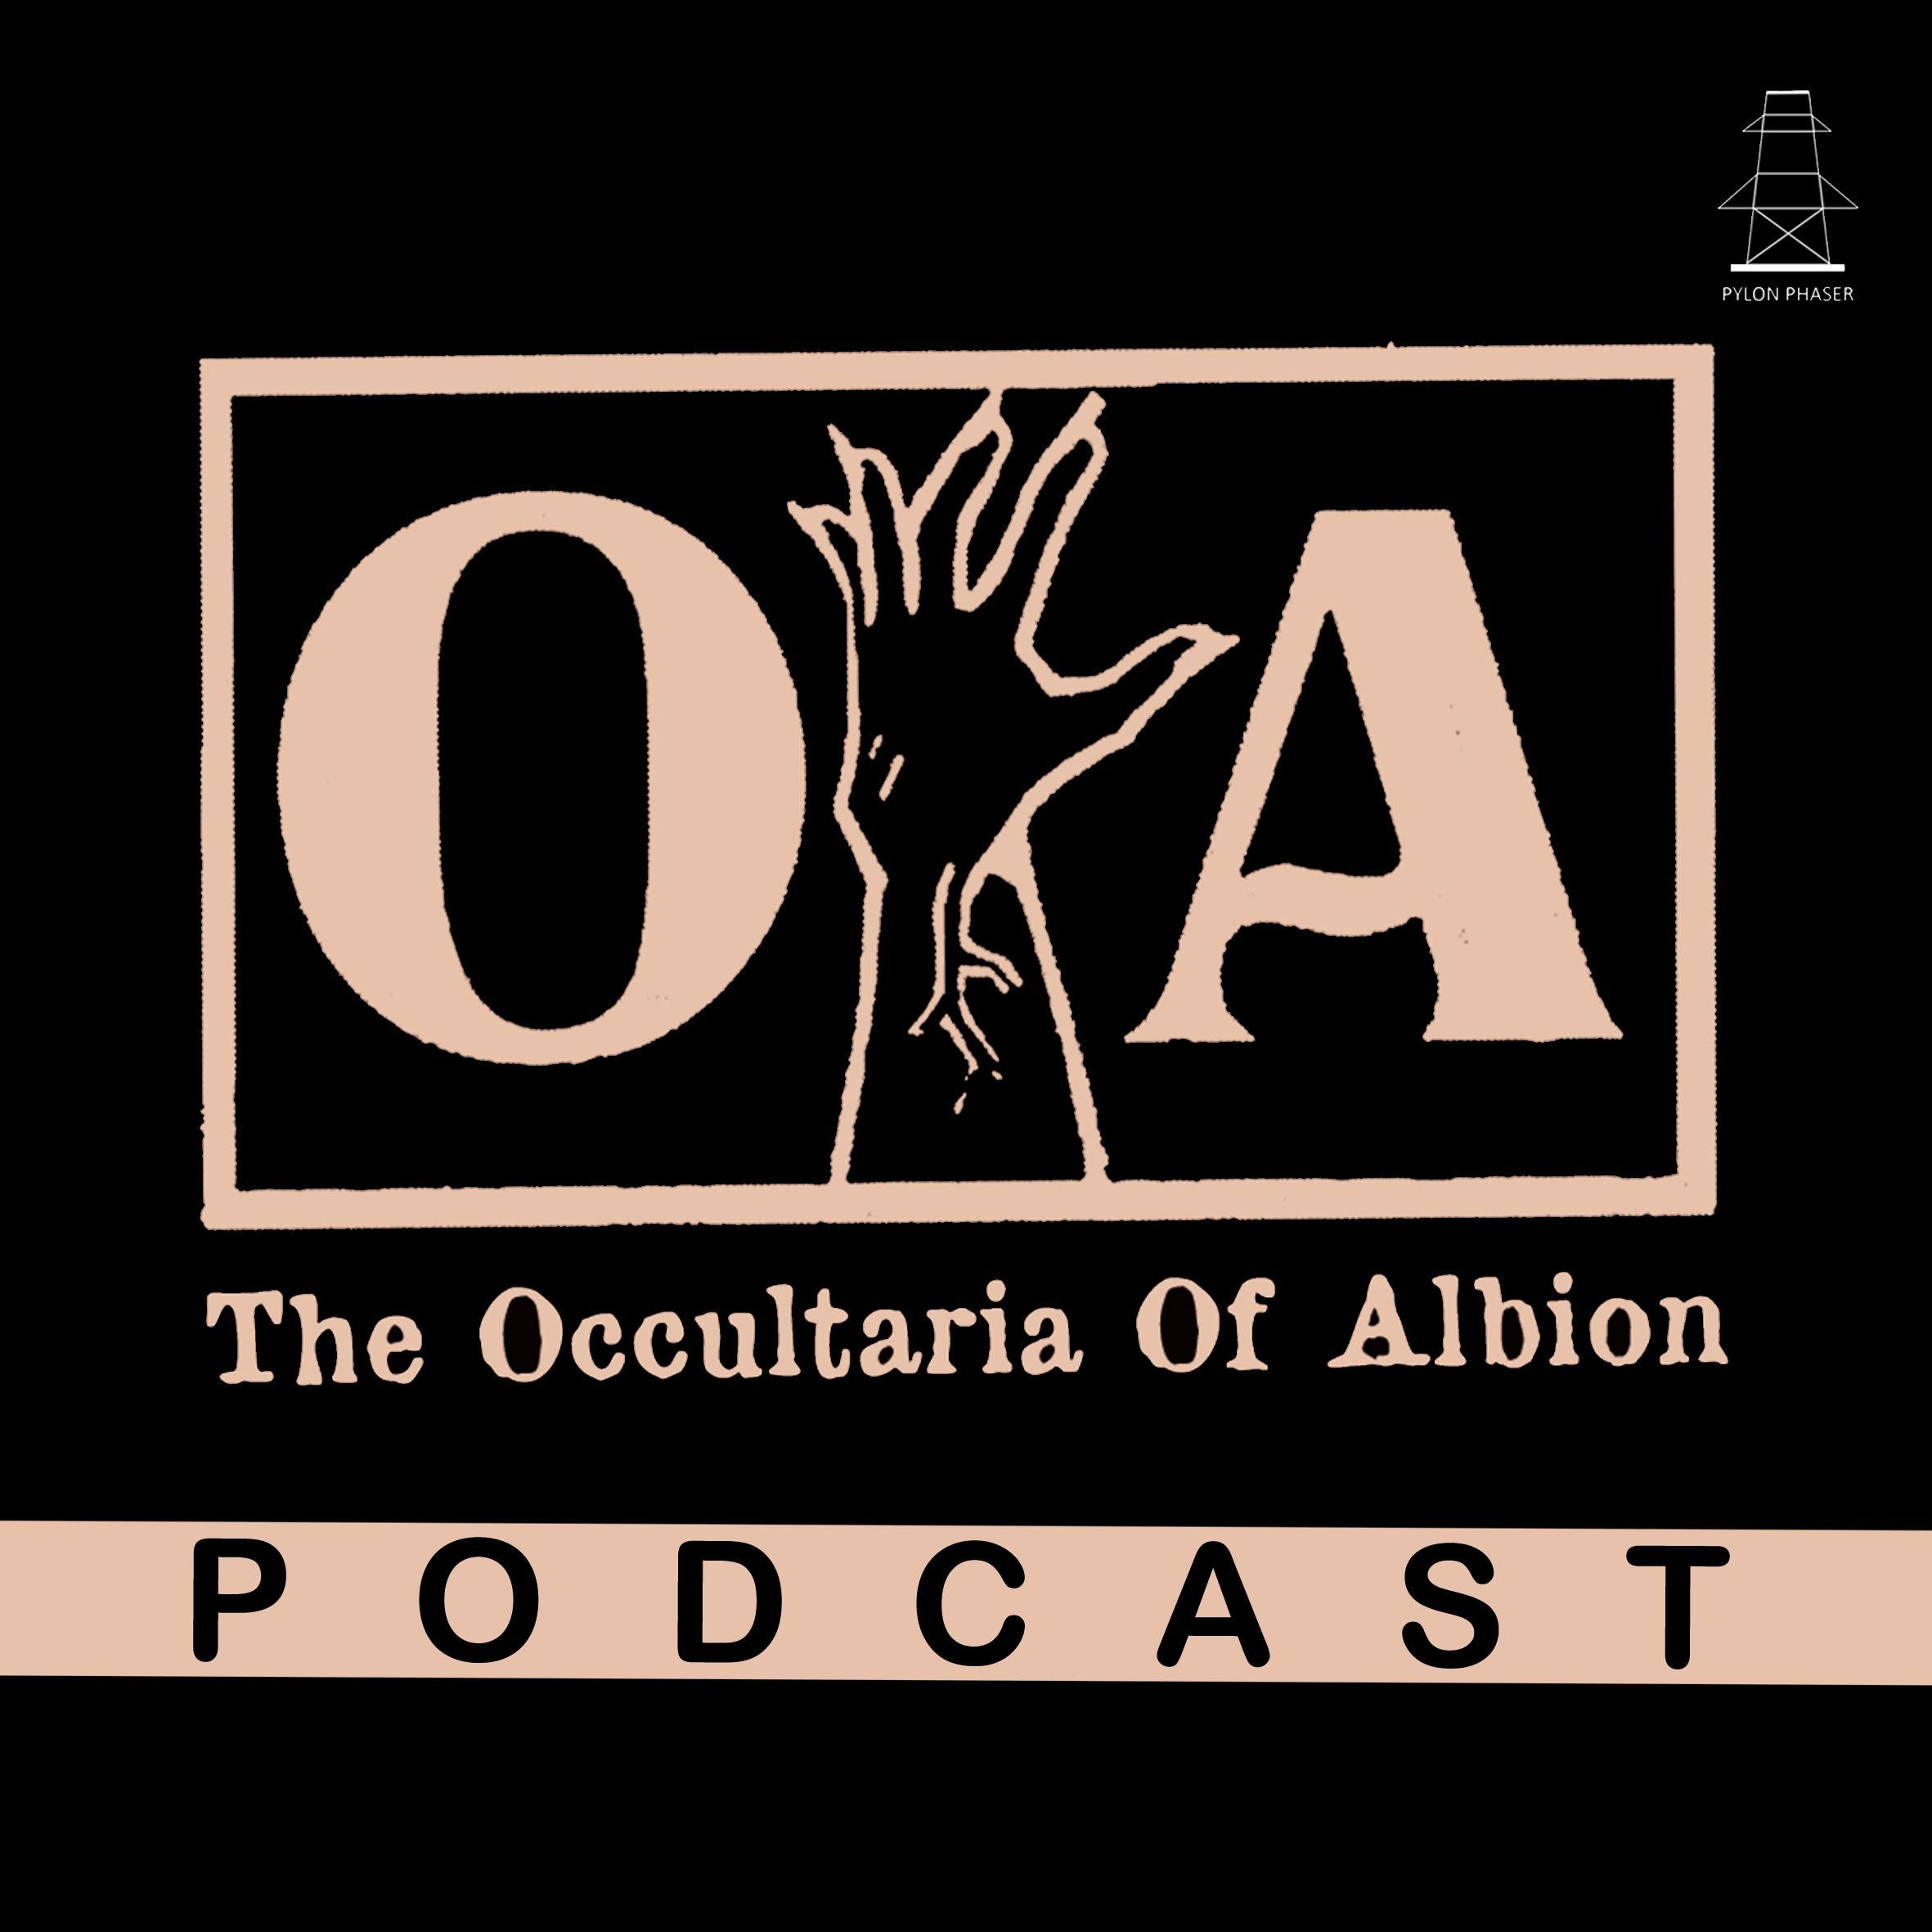 The Occultaria of Albion Podcast